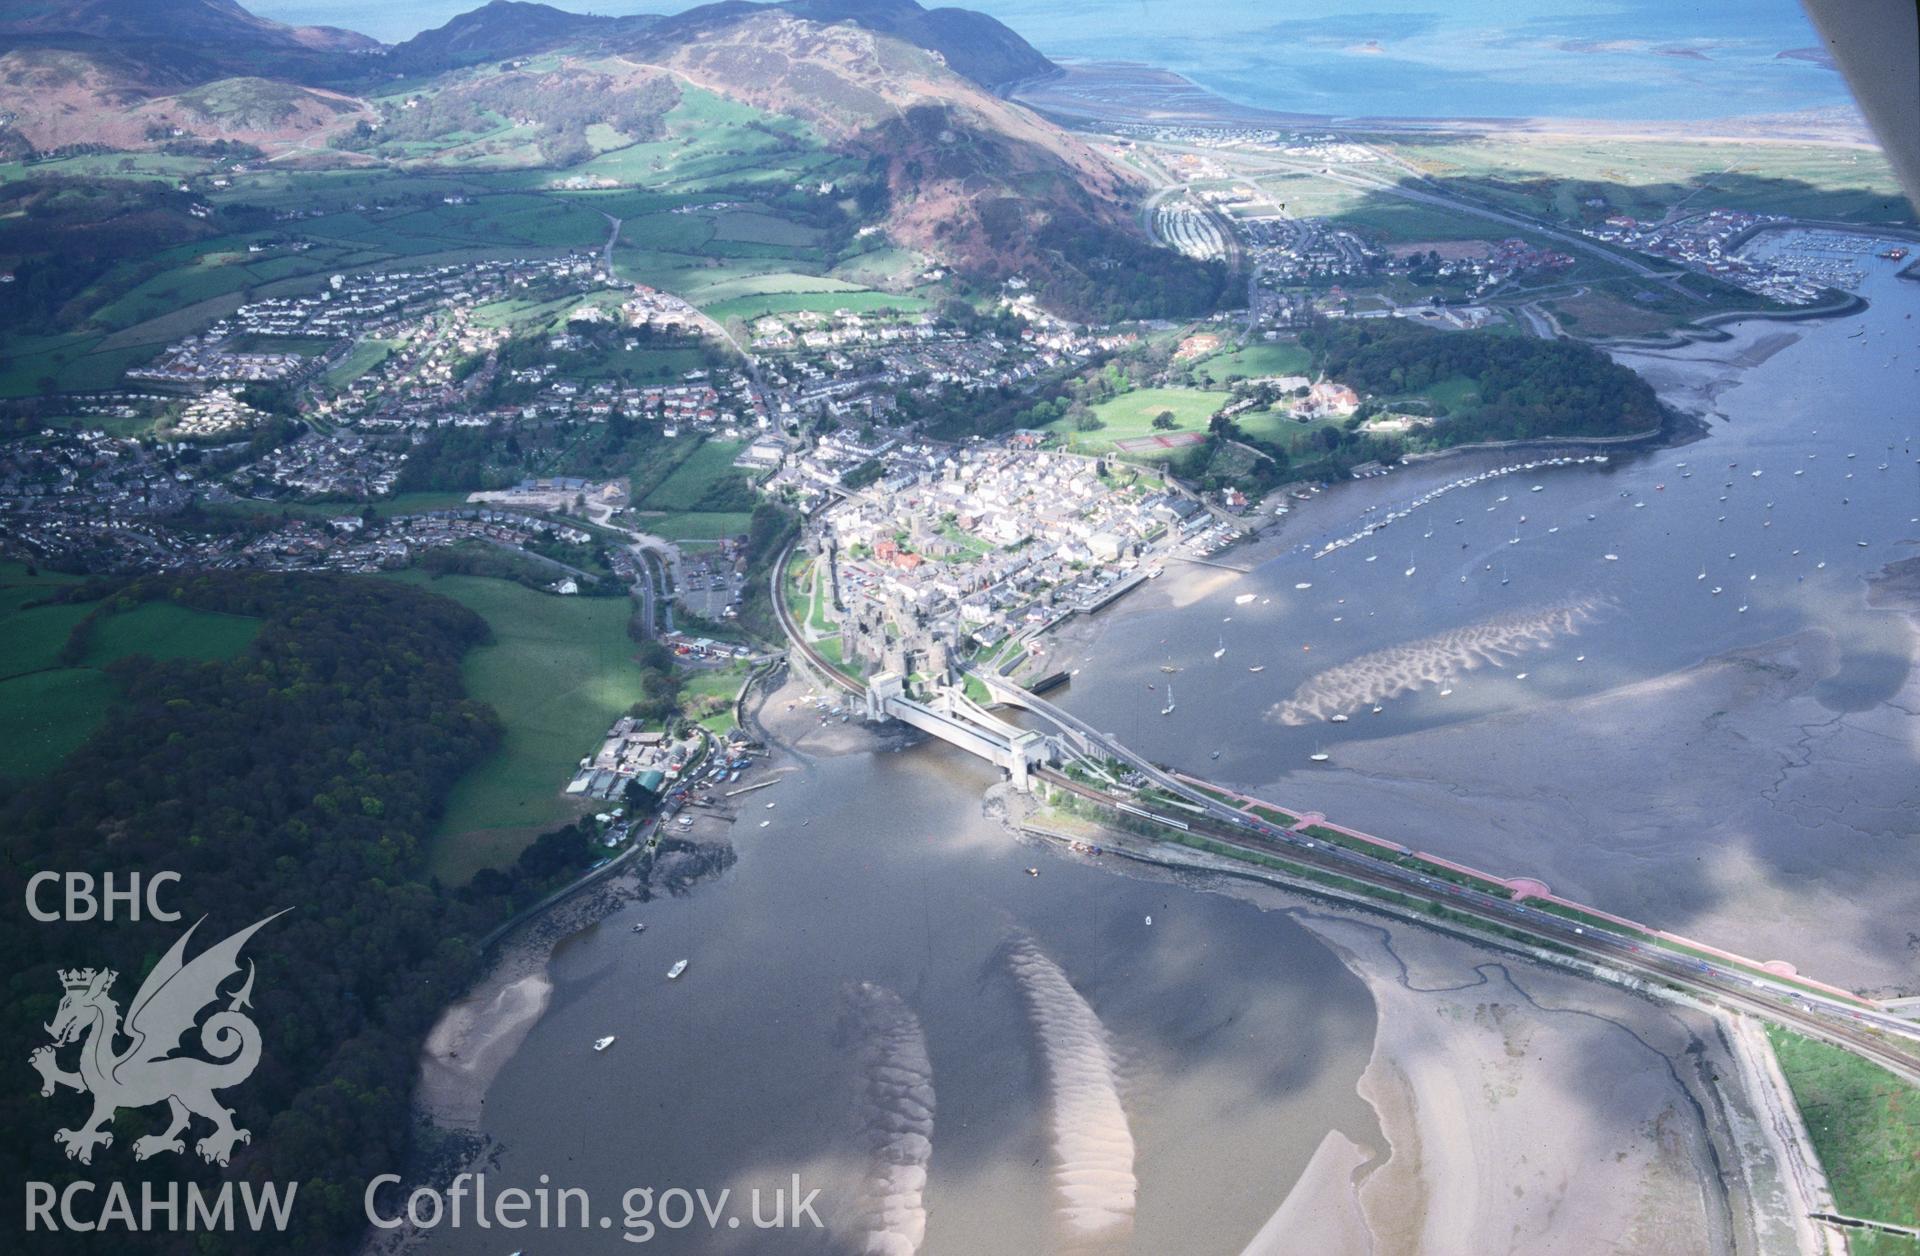 Slide of RCAHMW colour oblique aerial photograph of Conwy;conway, taken by T.G. Driver, 18/4/1998.